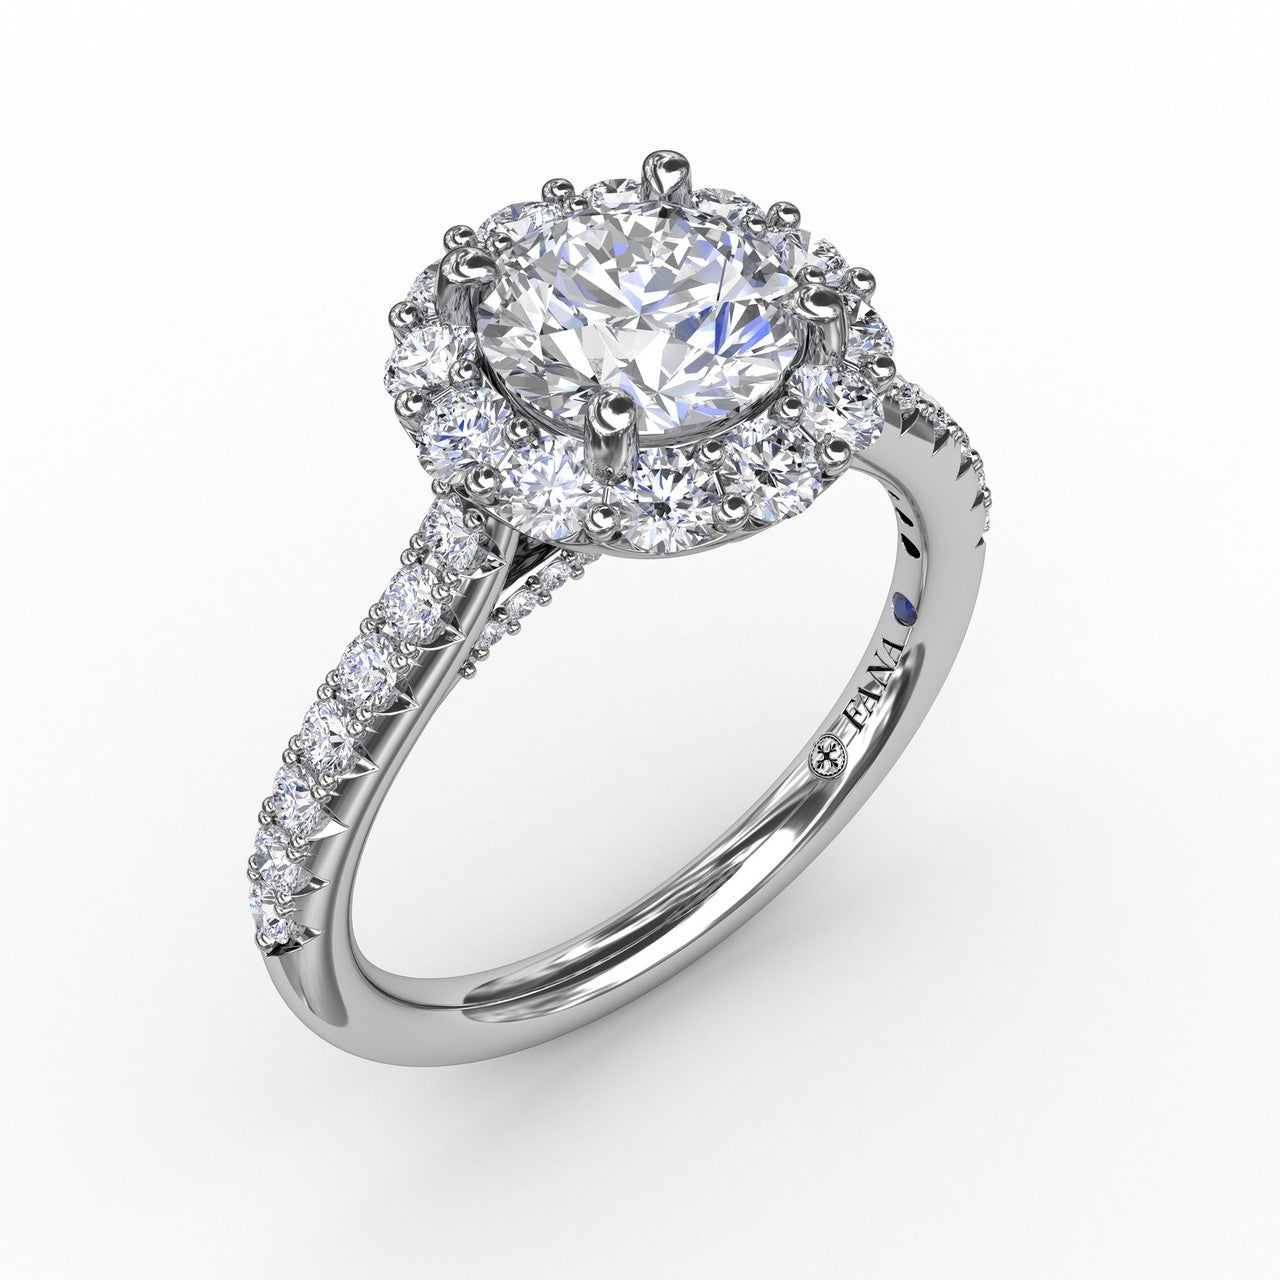 Pear Halo Engagement Ring with Braided One Row Pave' Set Band